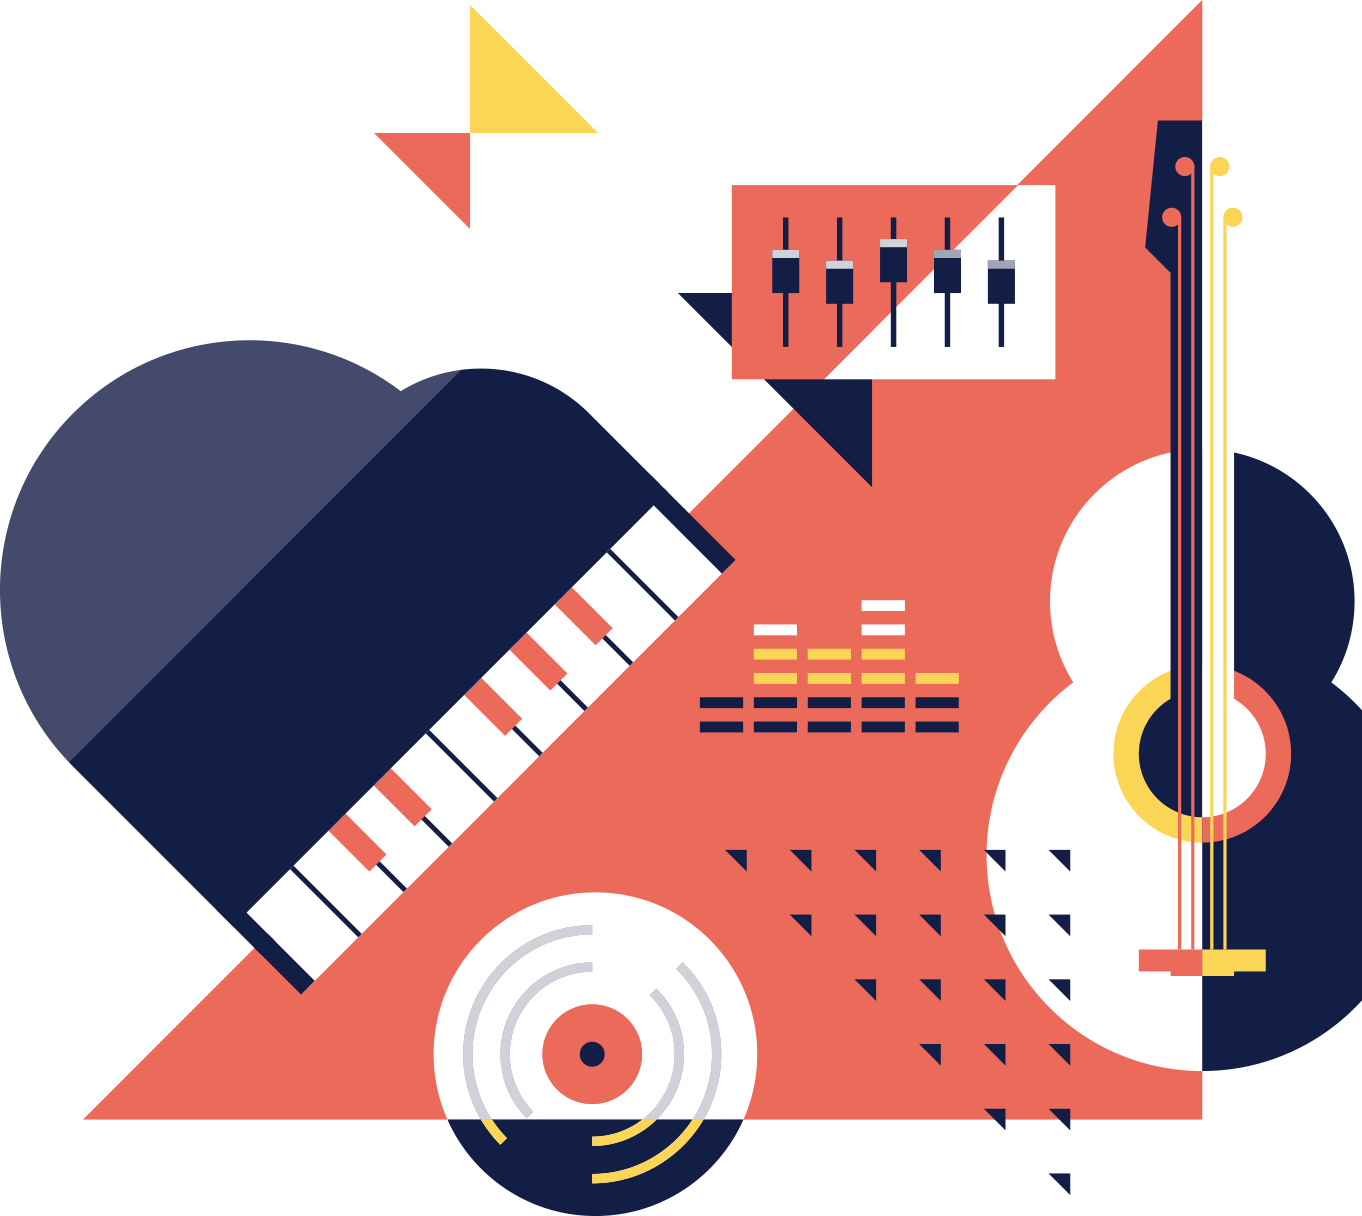 decorative image with mixer, piano, guitar, and vinyl record